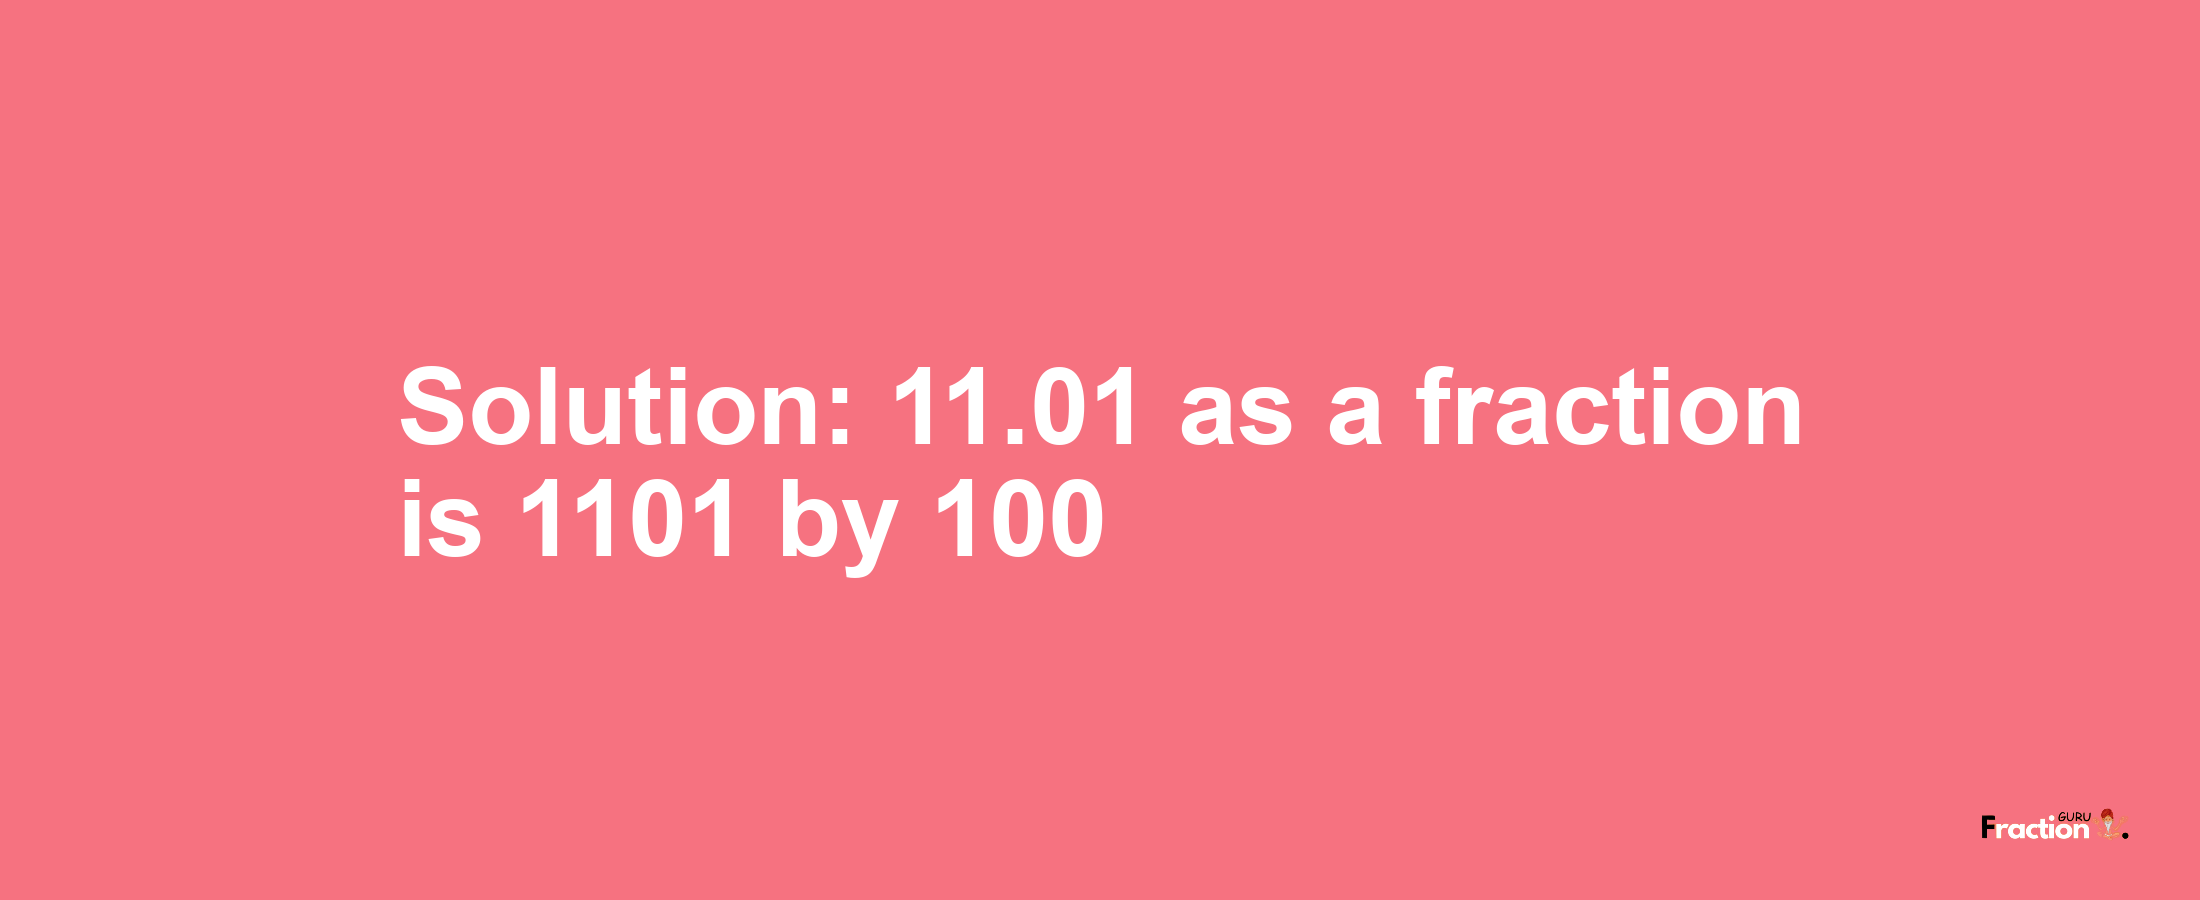 Solution:11.01 as a fraction is 1101/100